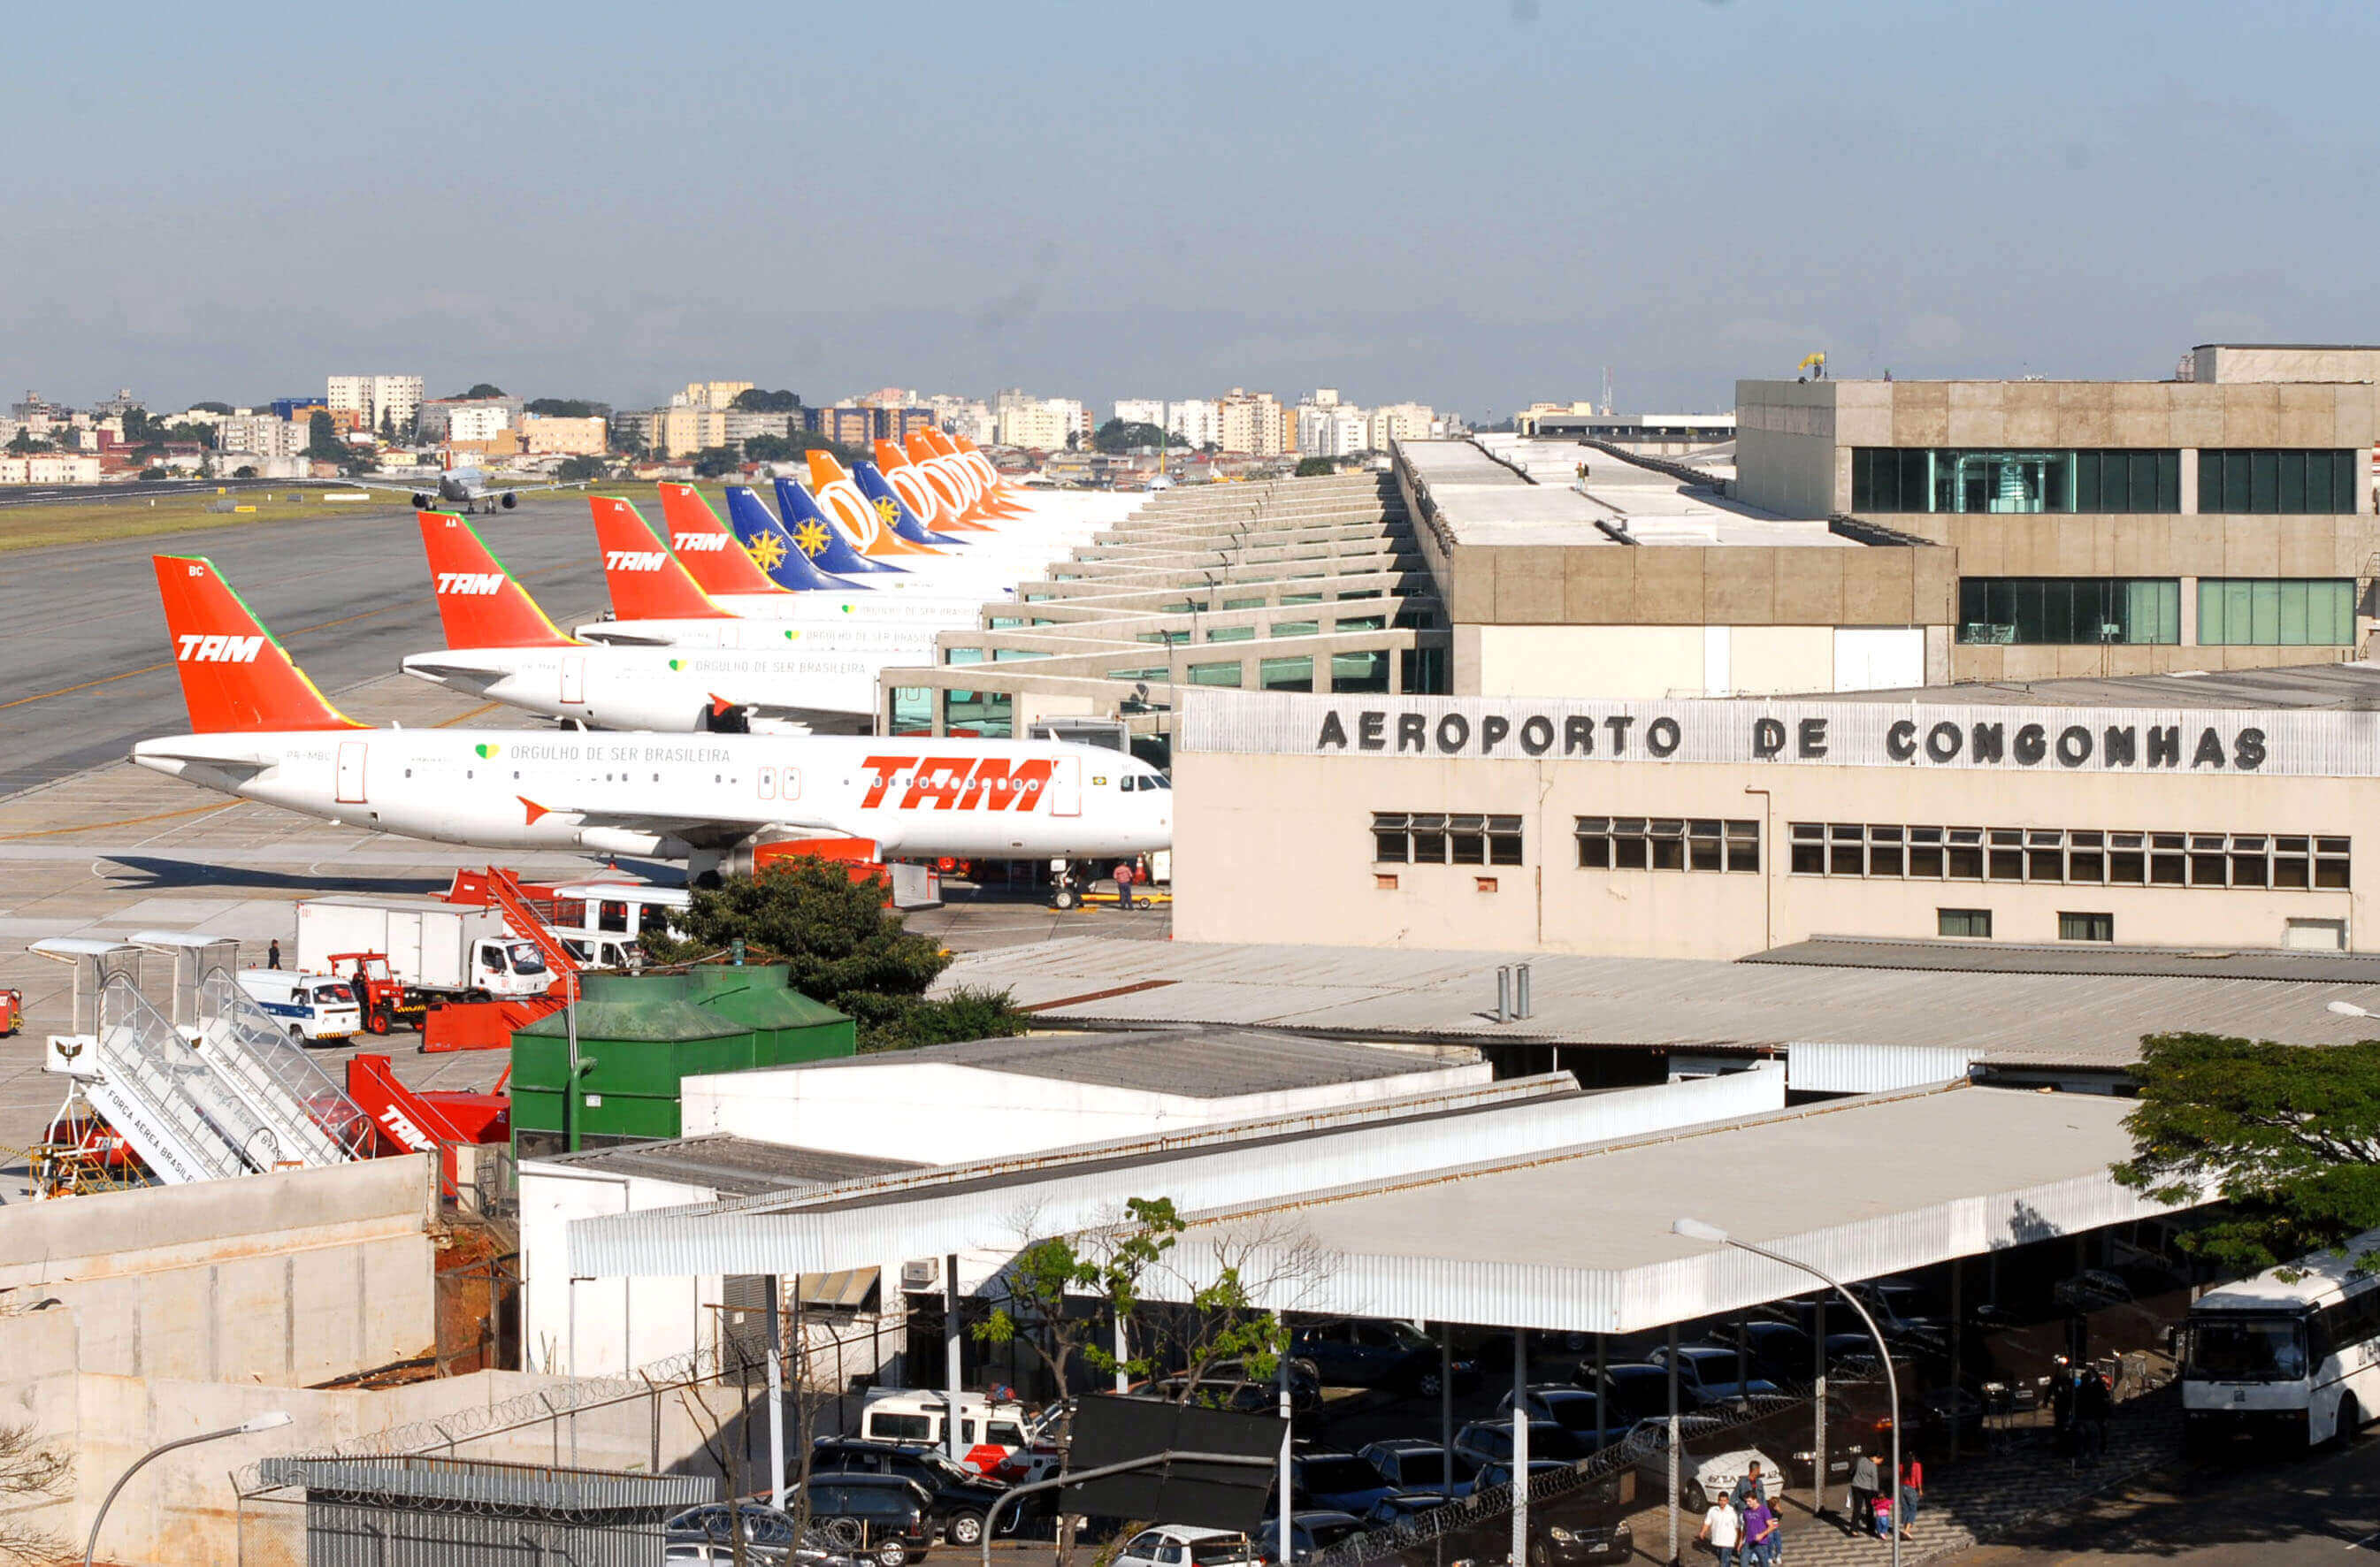 Image of the exterior of Congonhas airport